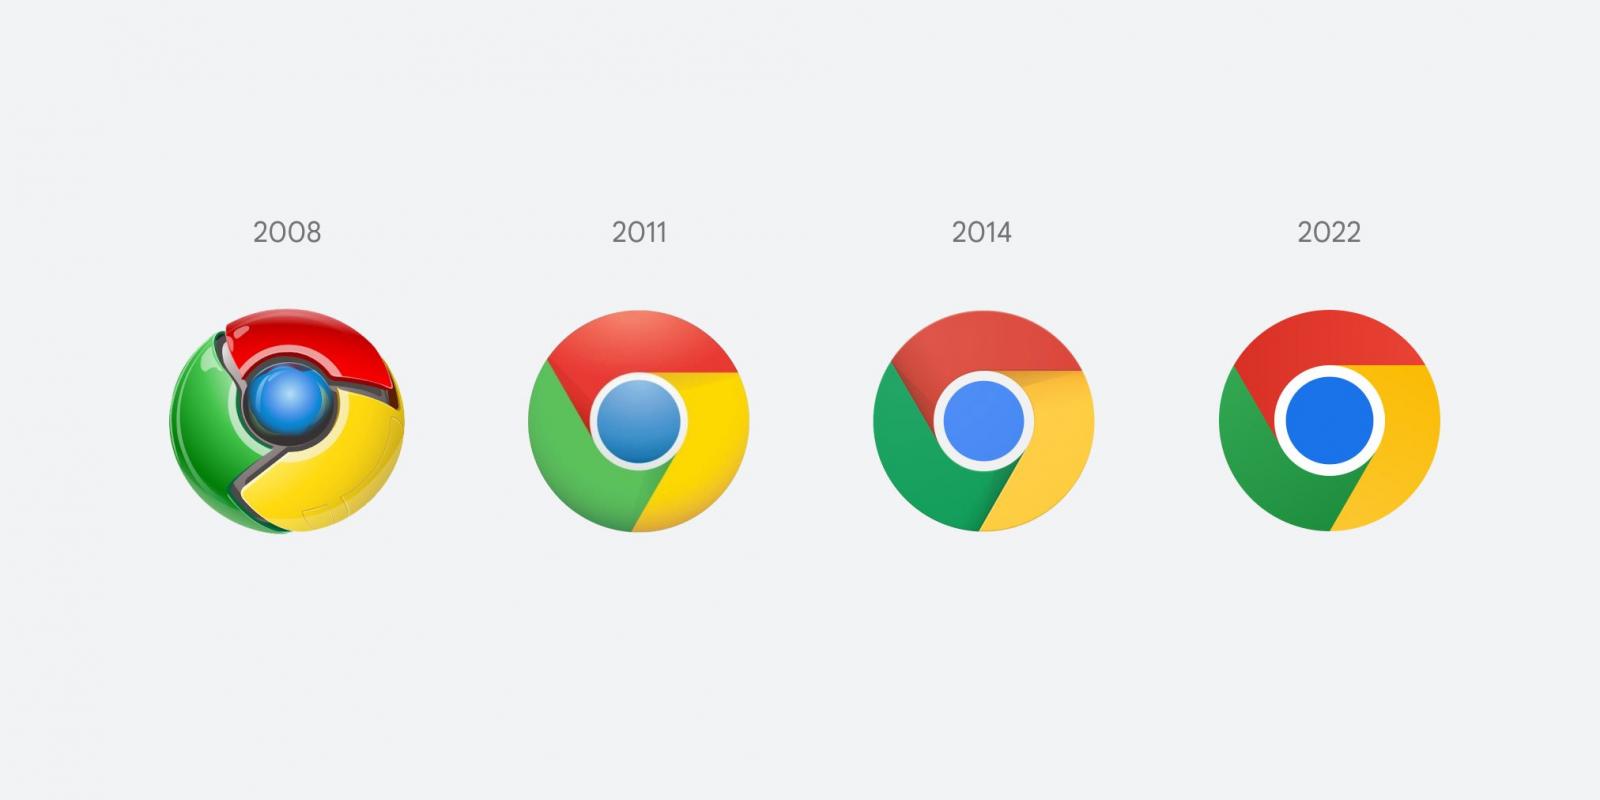 Chrome icon changes over the years